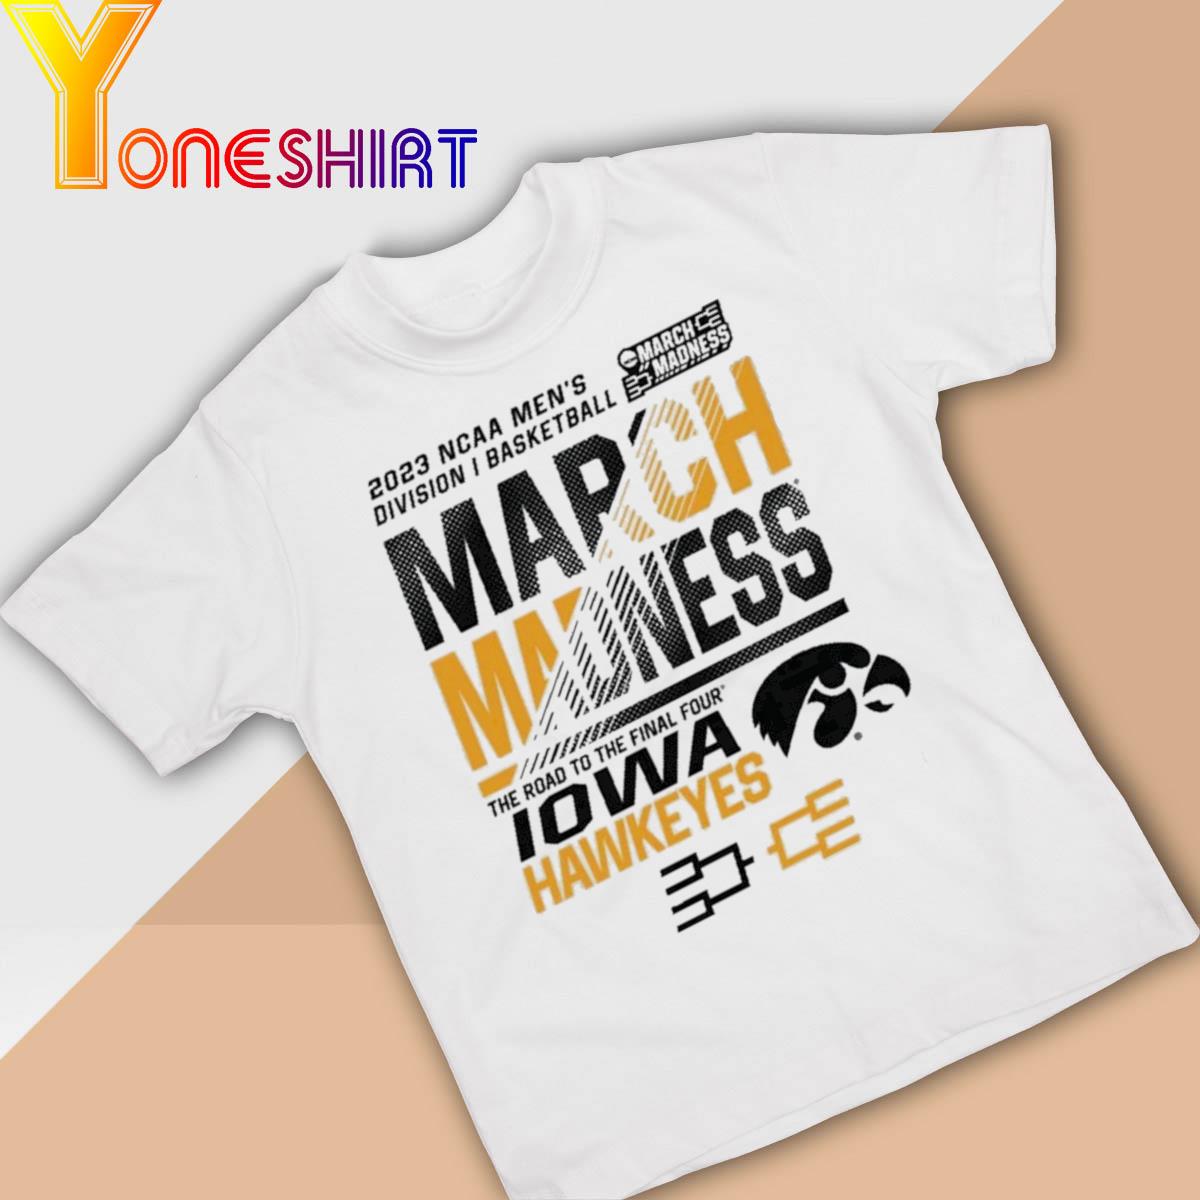 Original 2023 Ncaa Men's Division I Basketball March Madness the road to the Final Four Iowa Hawkeyes shirt